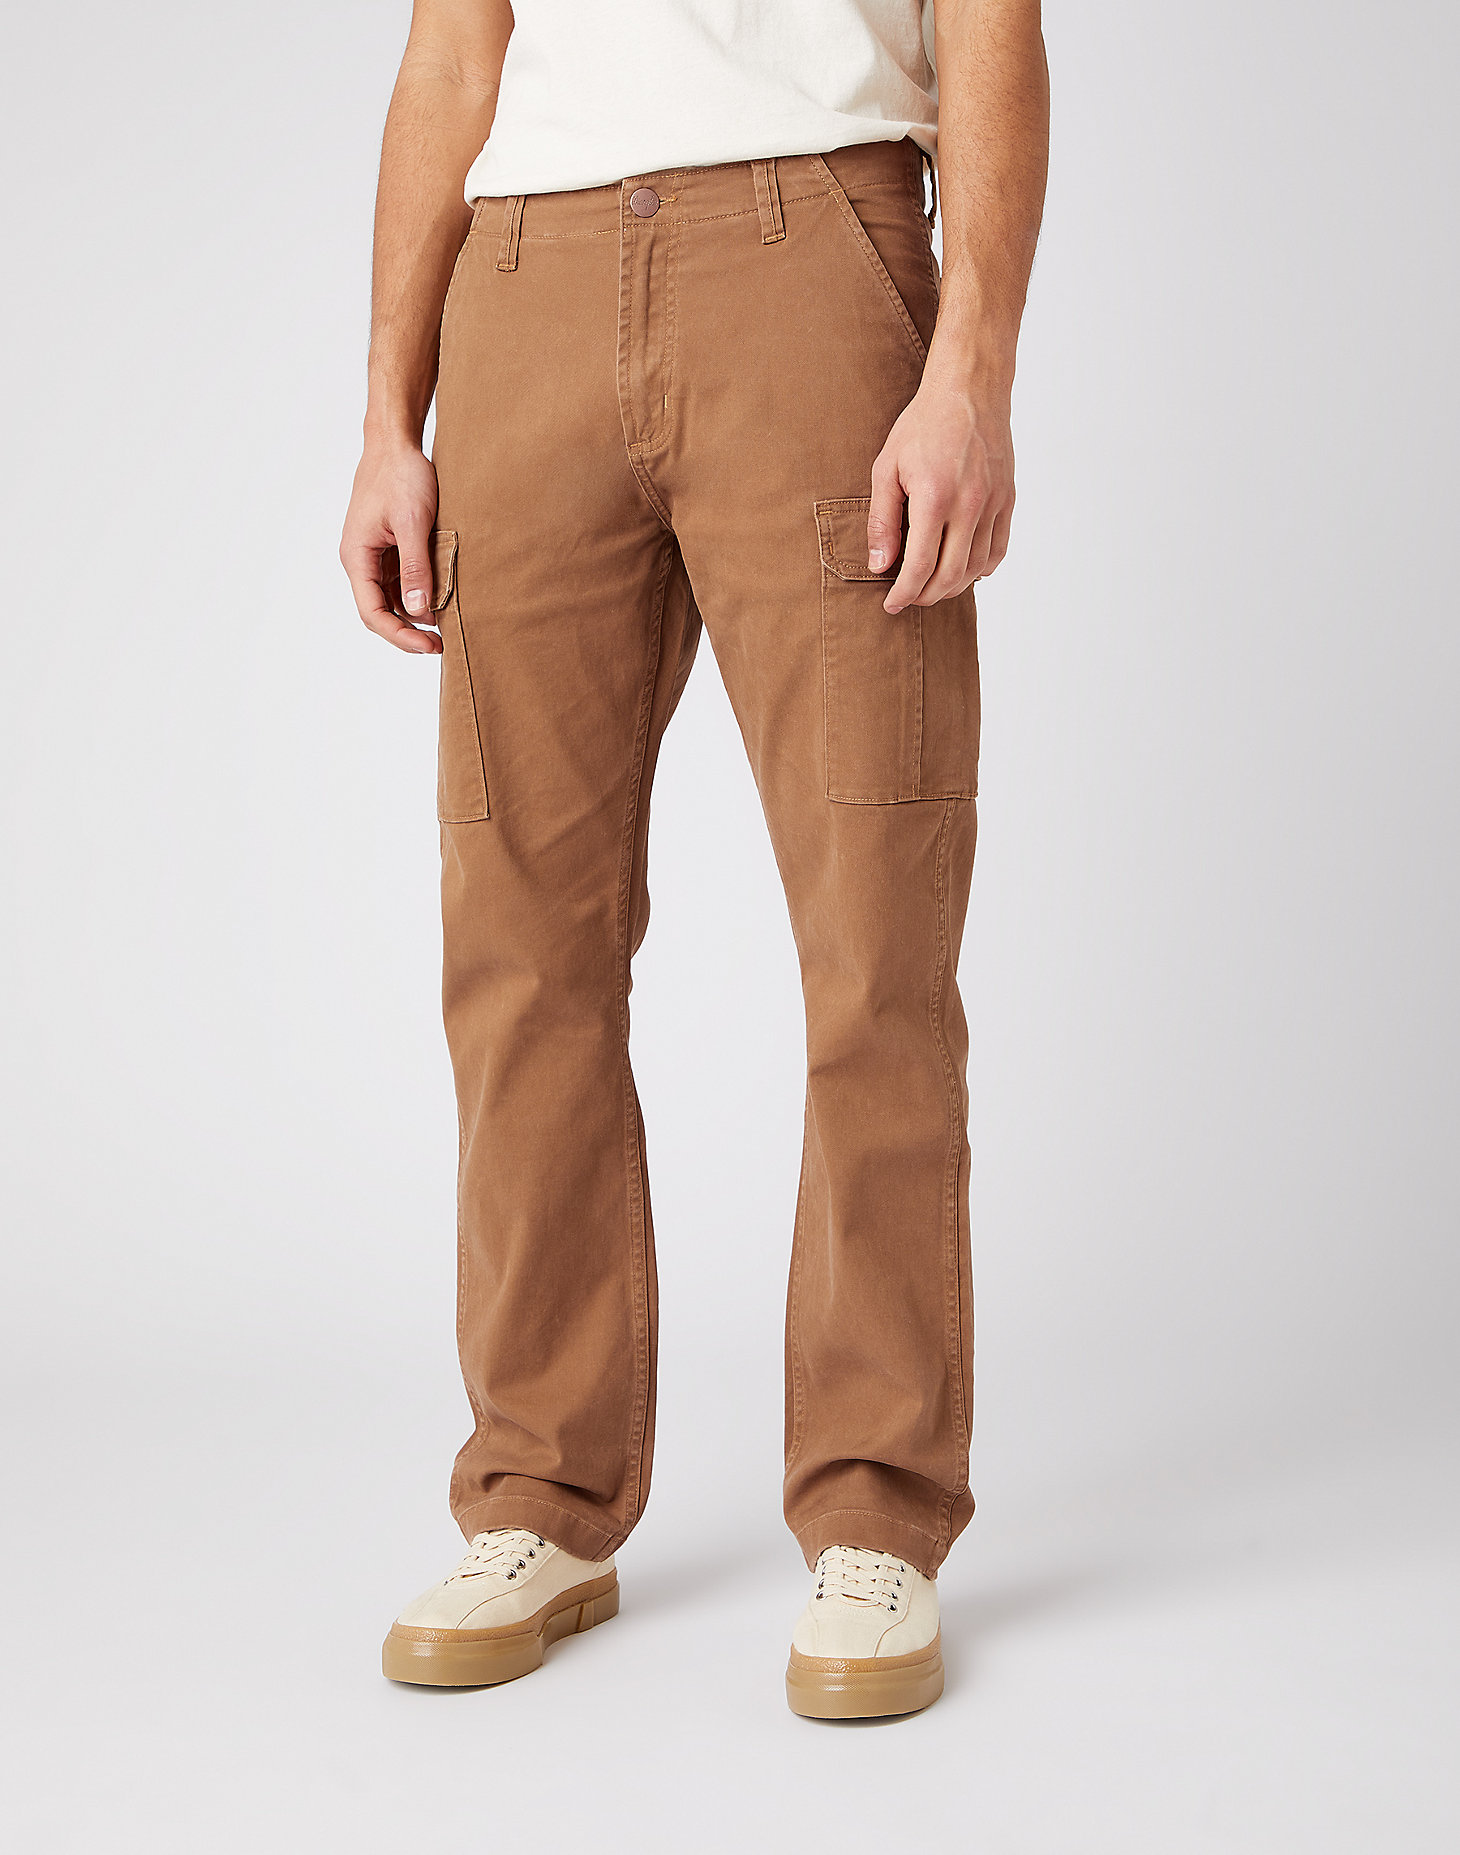 Casey Cargo in Toasted Coconut alternative view 1